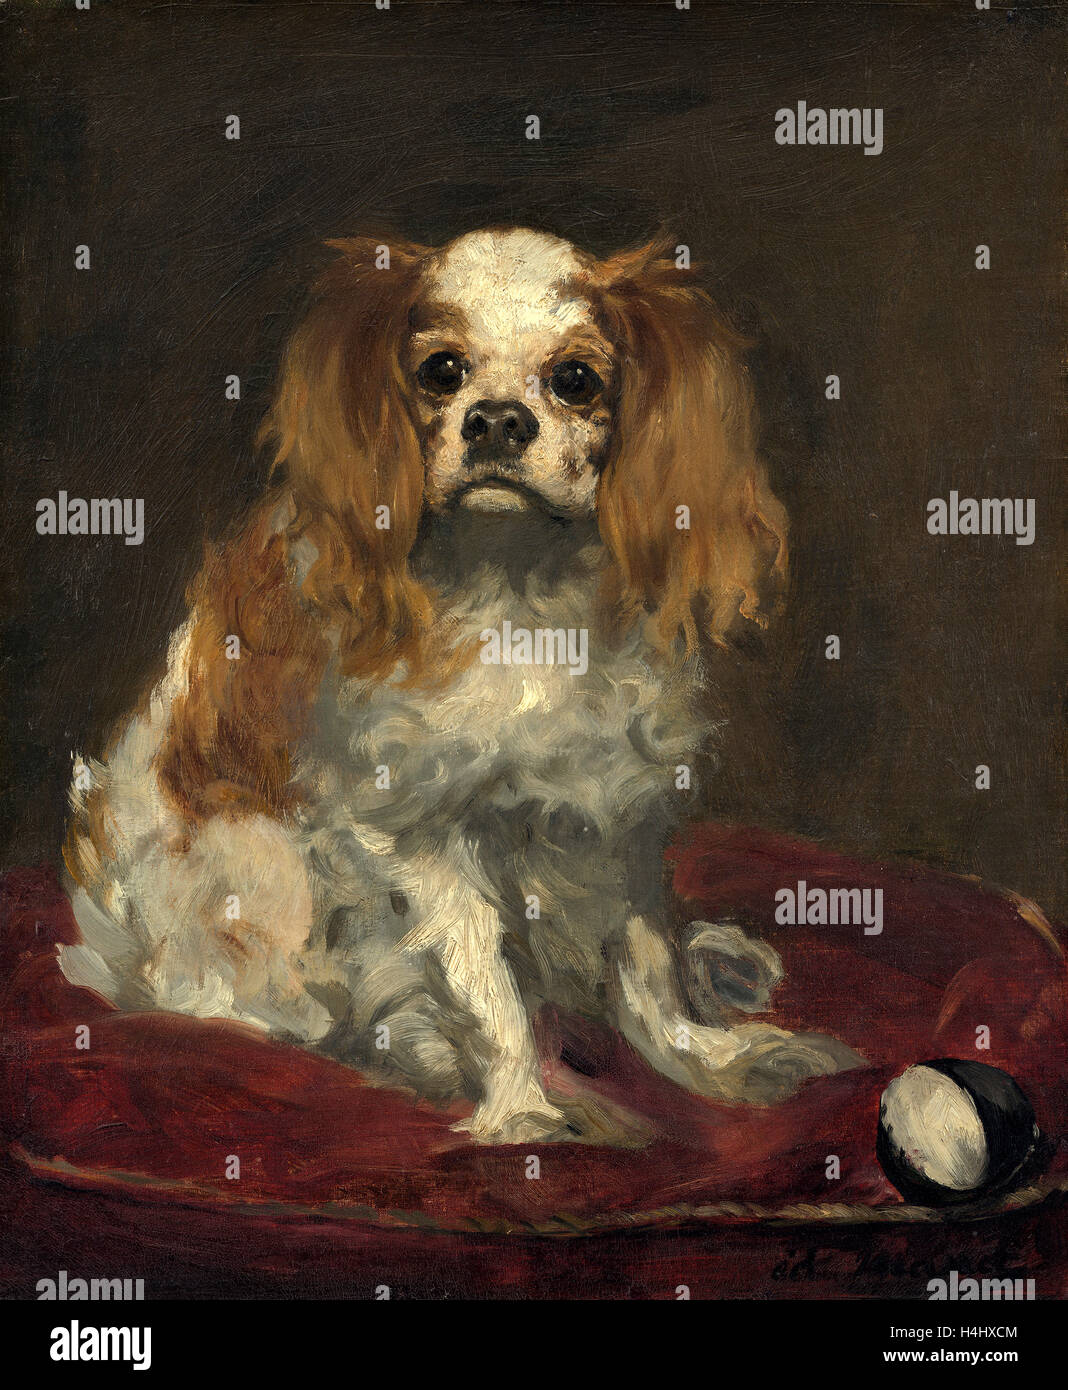 Edouard Manet (French, 1832 - 1883), A King Charles Spaniel, c. 1866, oil on linen Stock Photo